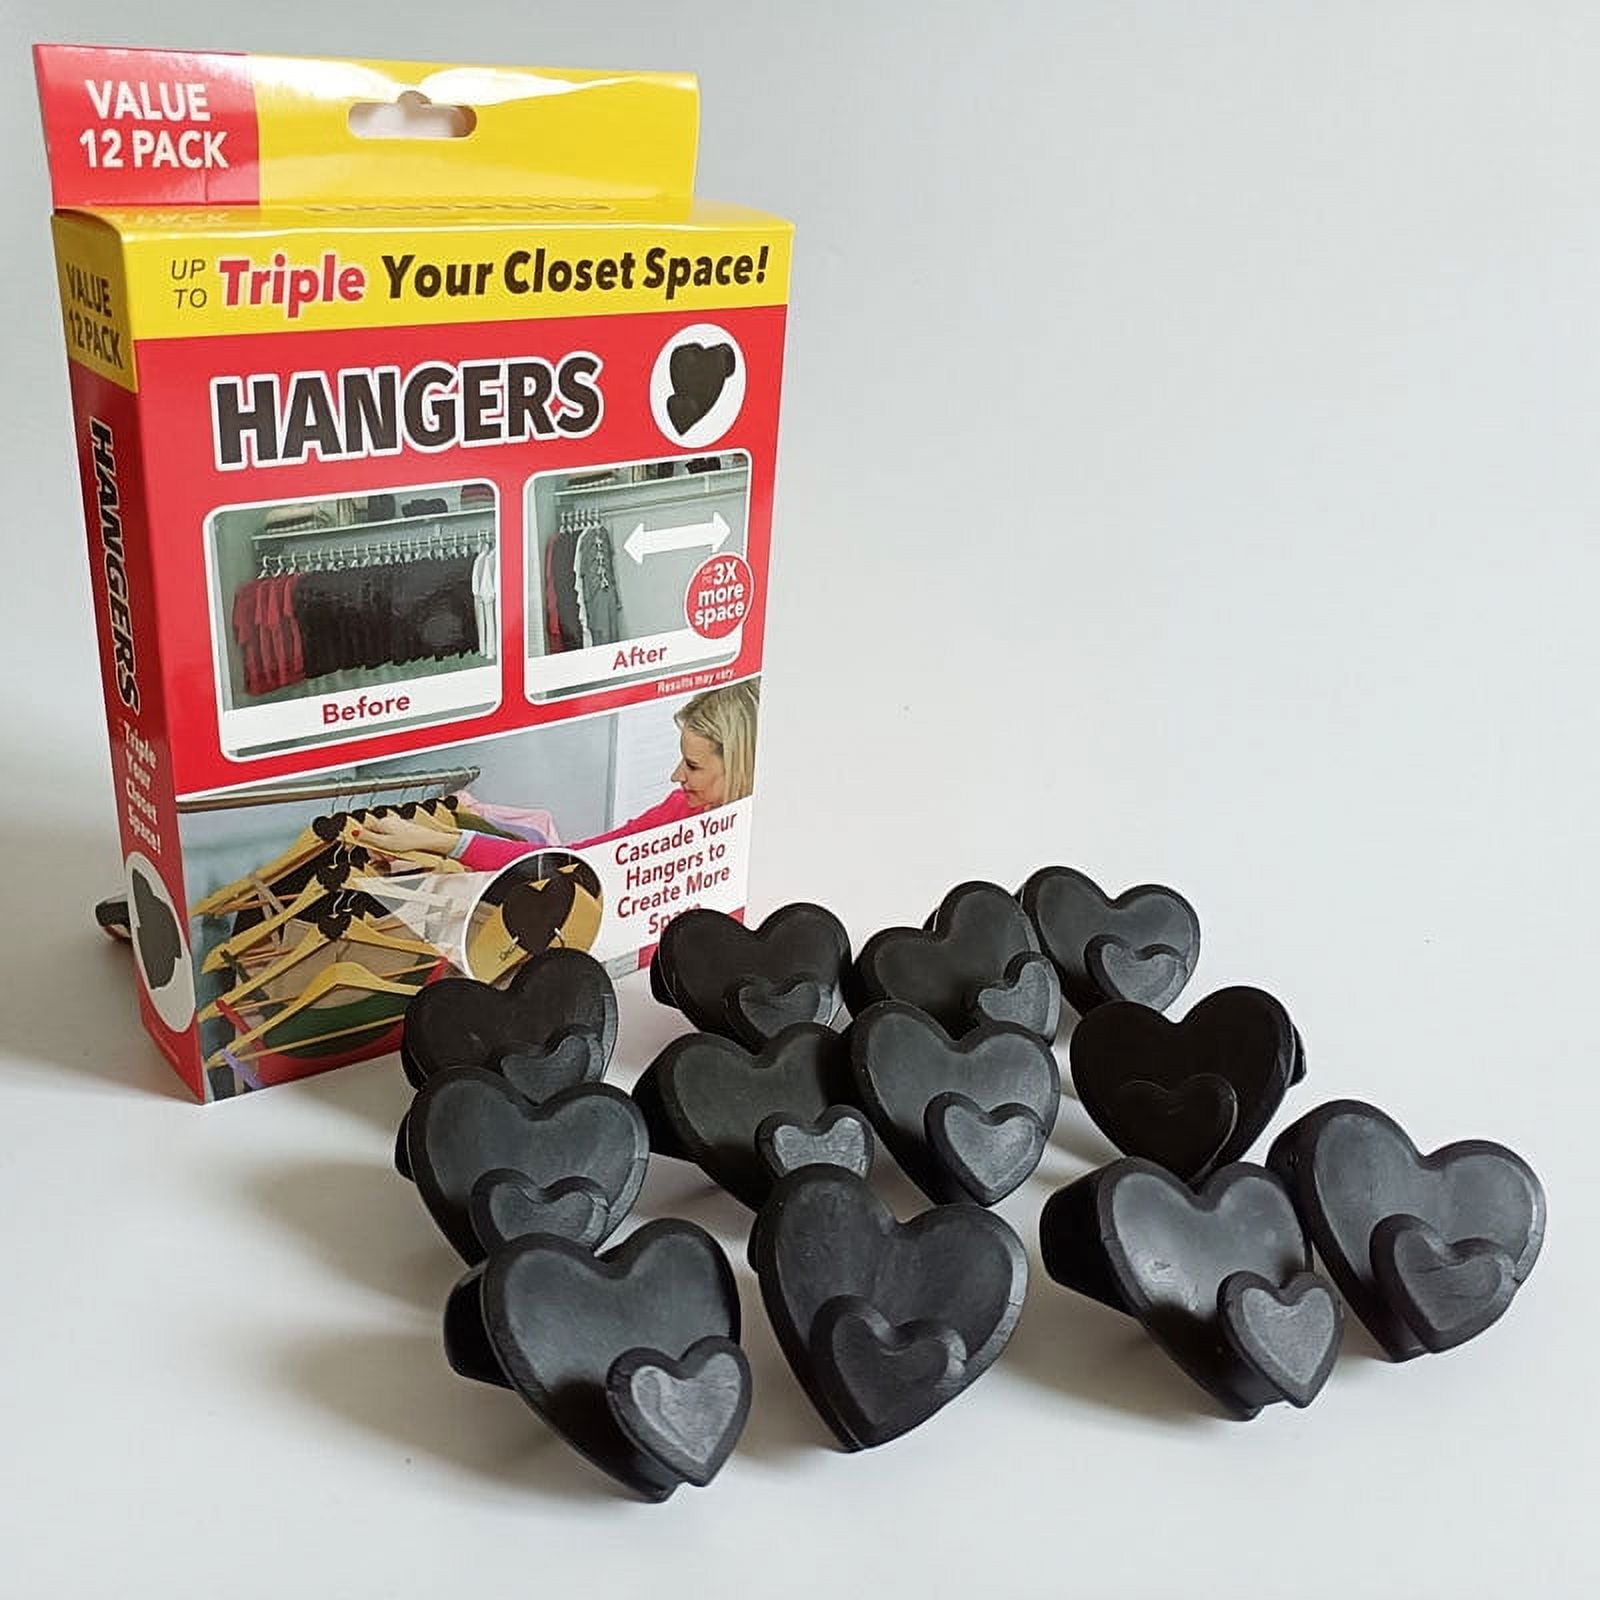 RUBY Space Triangles Hanger Hooks,12 Pcs Cascade Hangers to